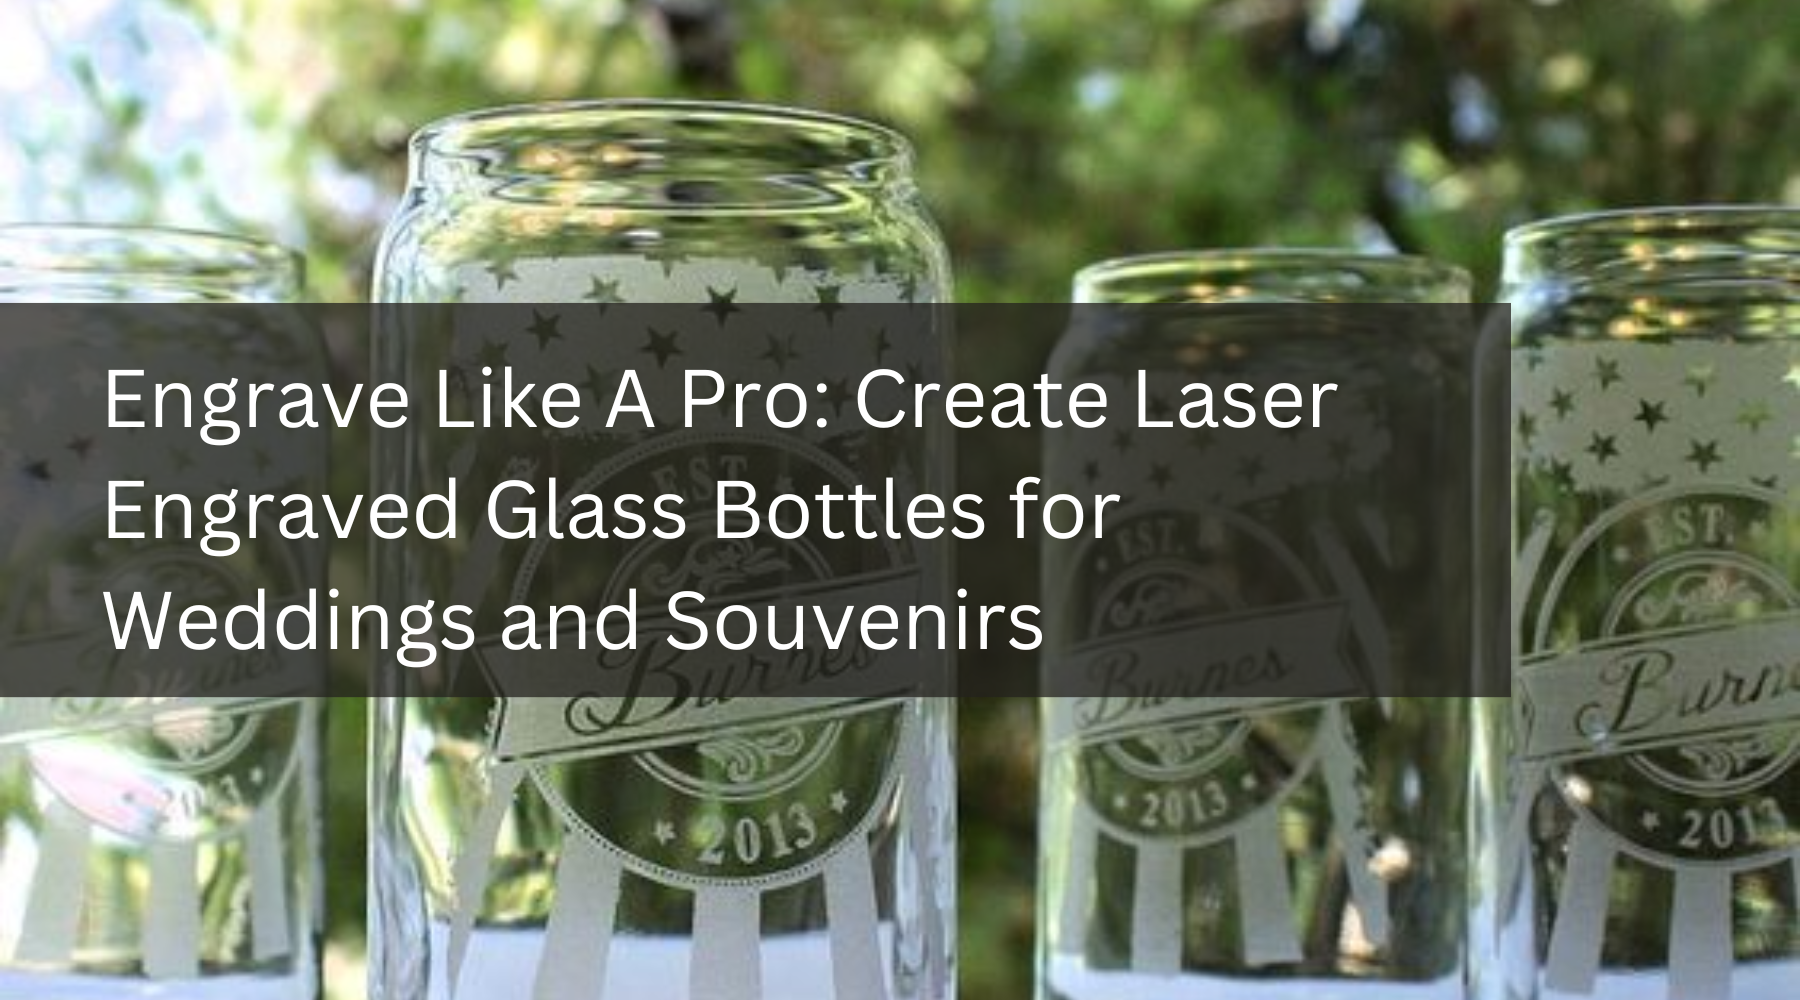 Engrave Like A Pro: Create Laser Engraved Glass Bottles for Weddings and Souvenirs